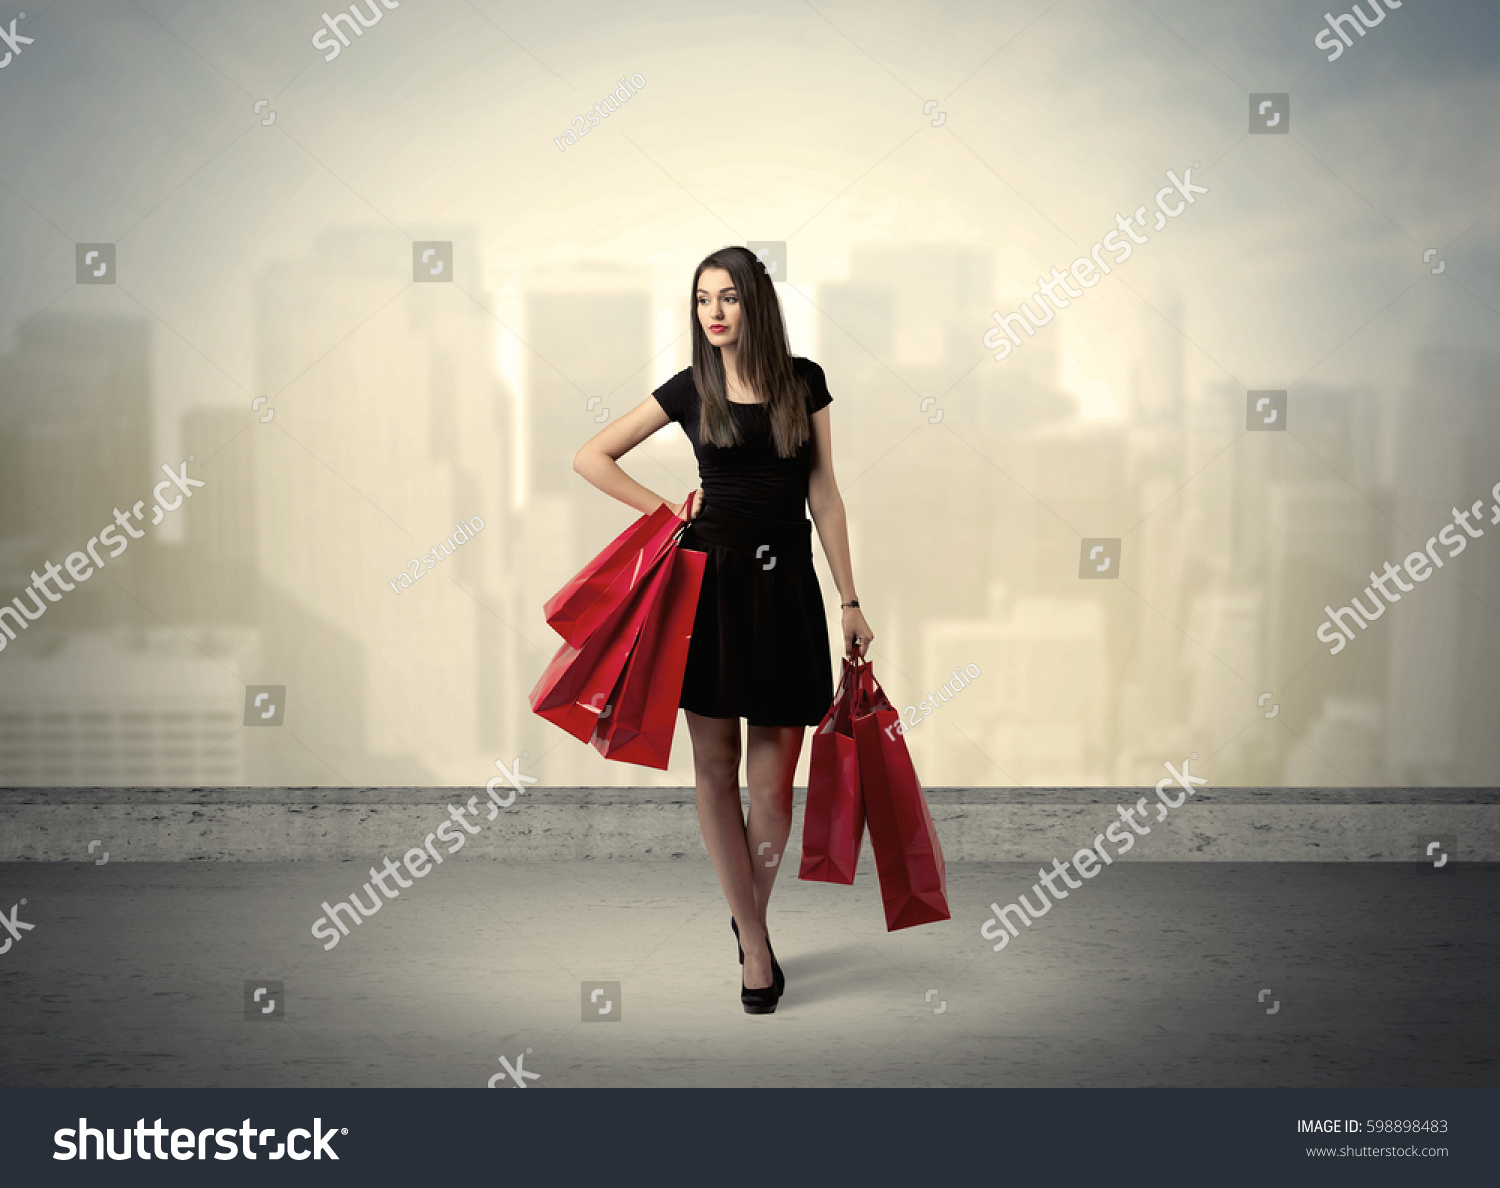 Attractive lady in black holding red shopping bags standing in front o urban landscape with tall buildings concept #598898483